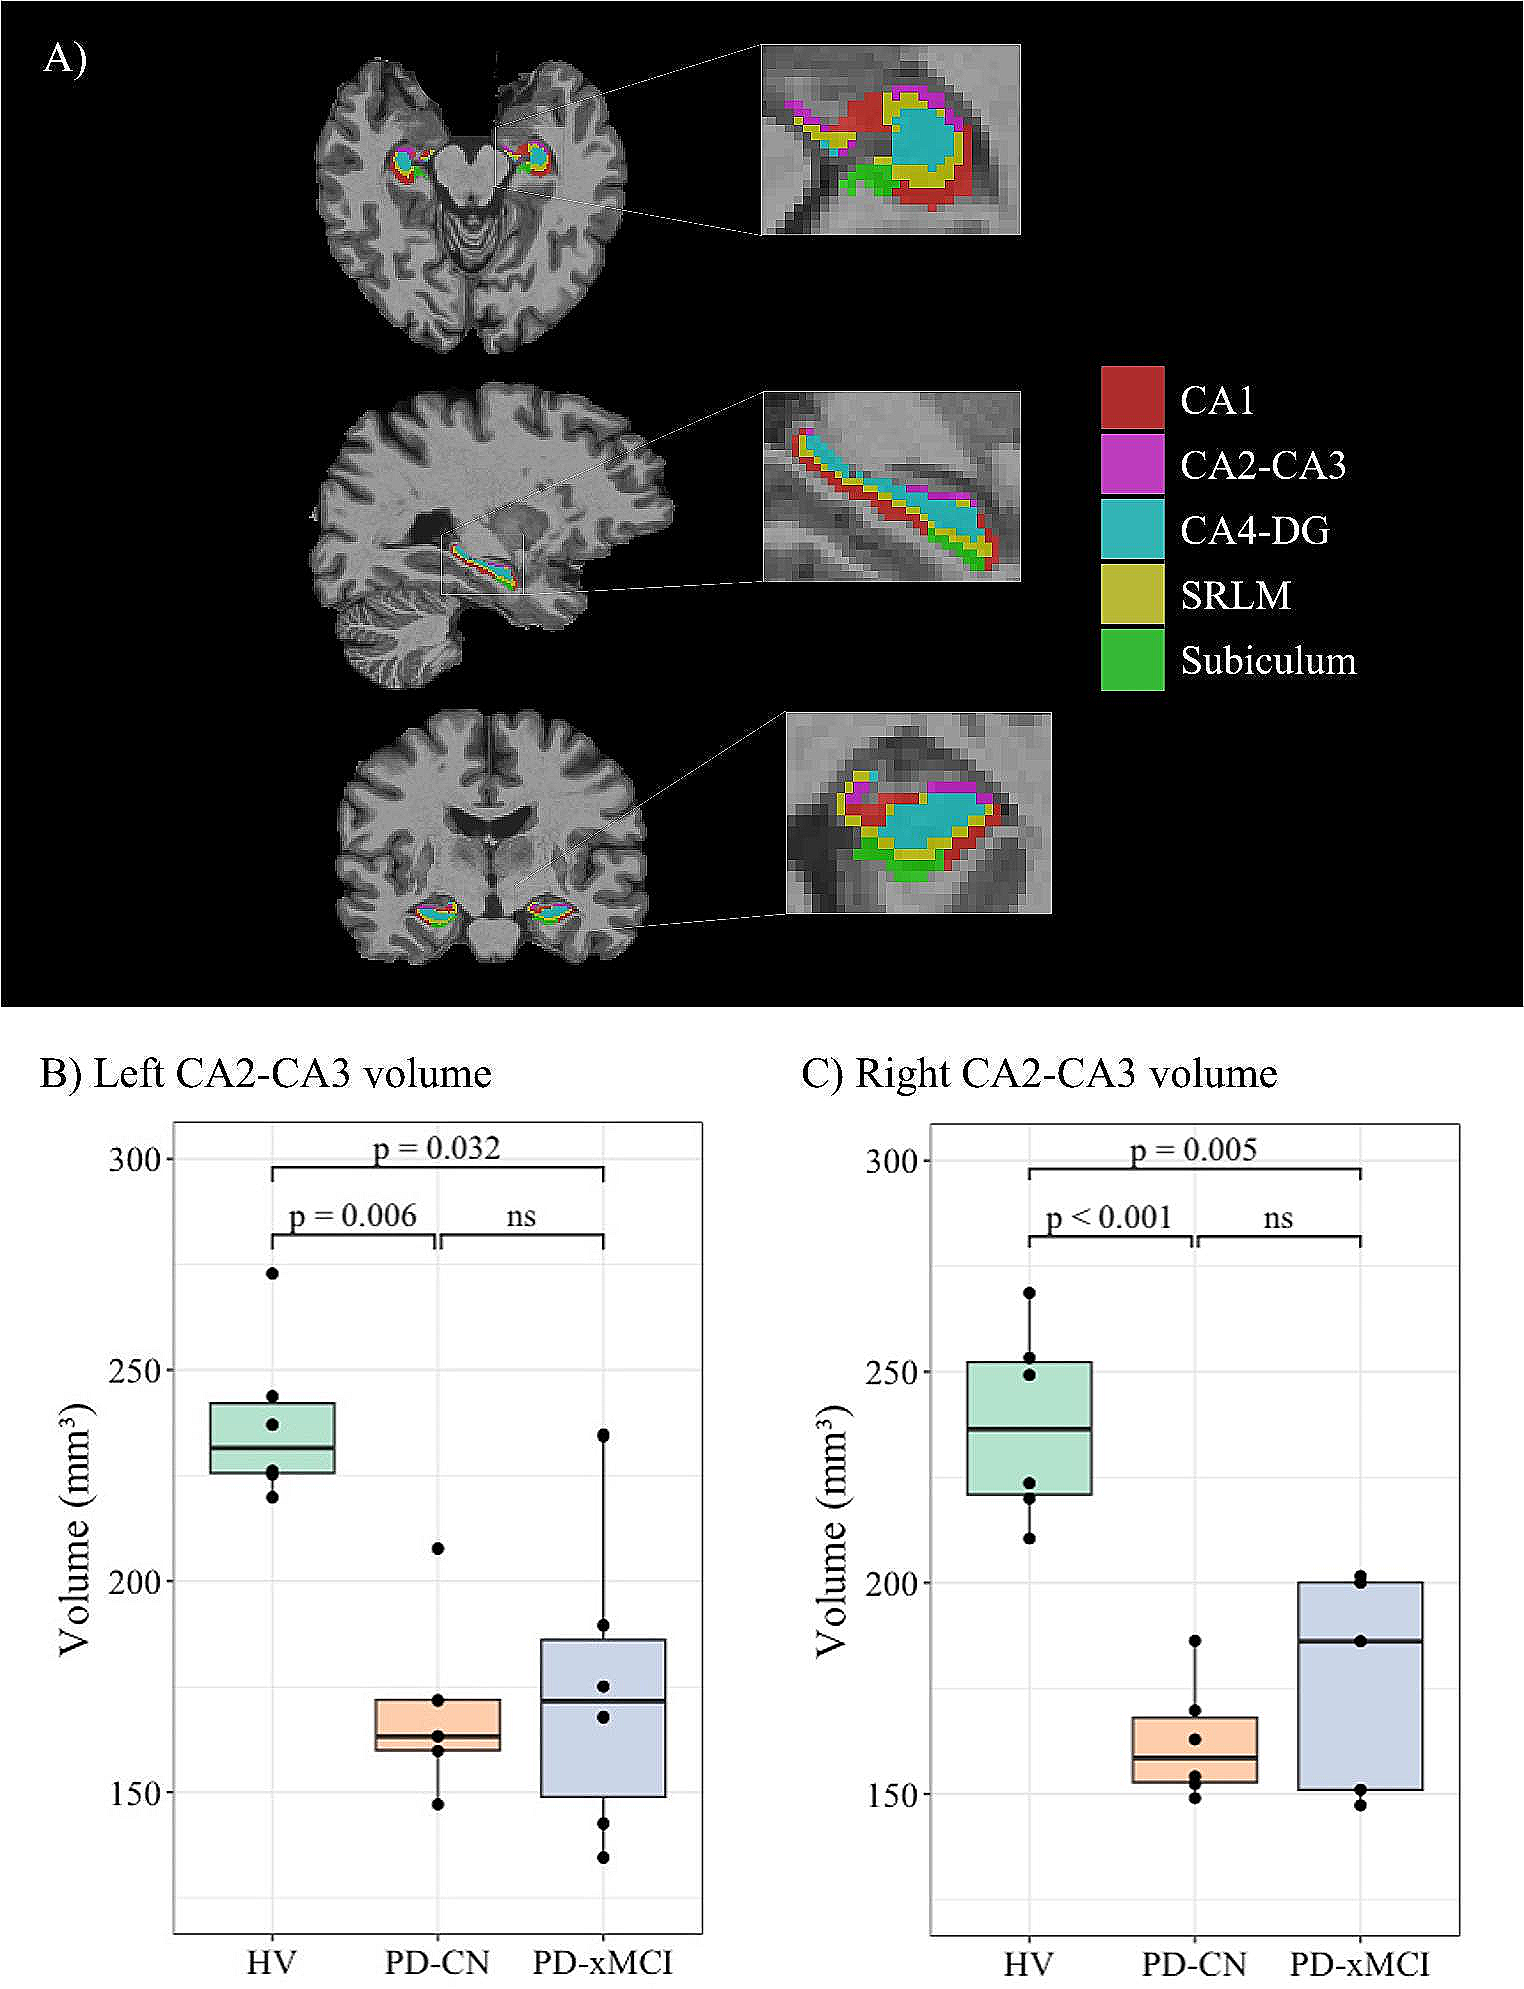 Parkinson’s disease CA2-CA3 hippocampal atrophy is accompanied by increased cholinergic innervation in patients with normal cognition but not in patients with mild cognitive impairment